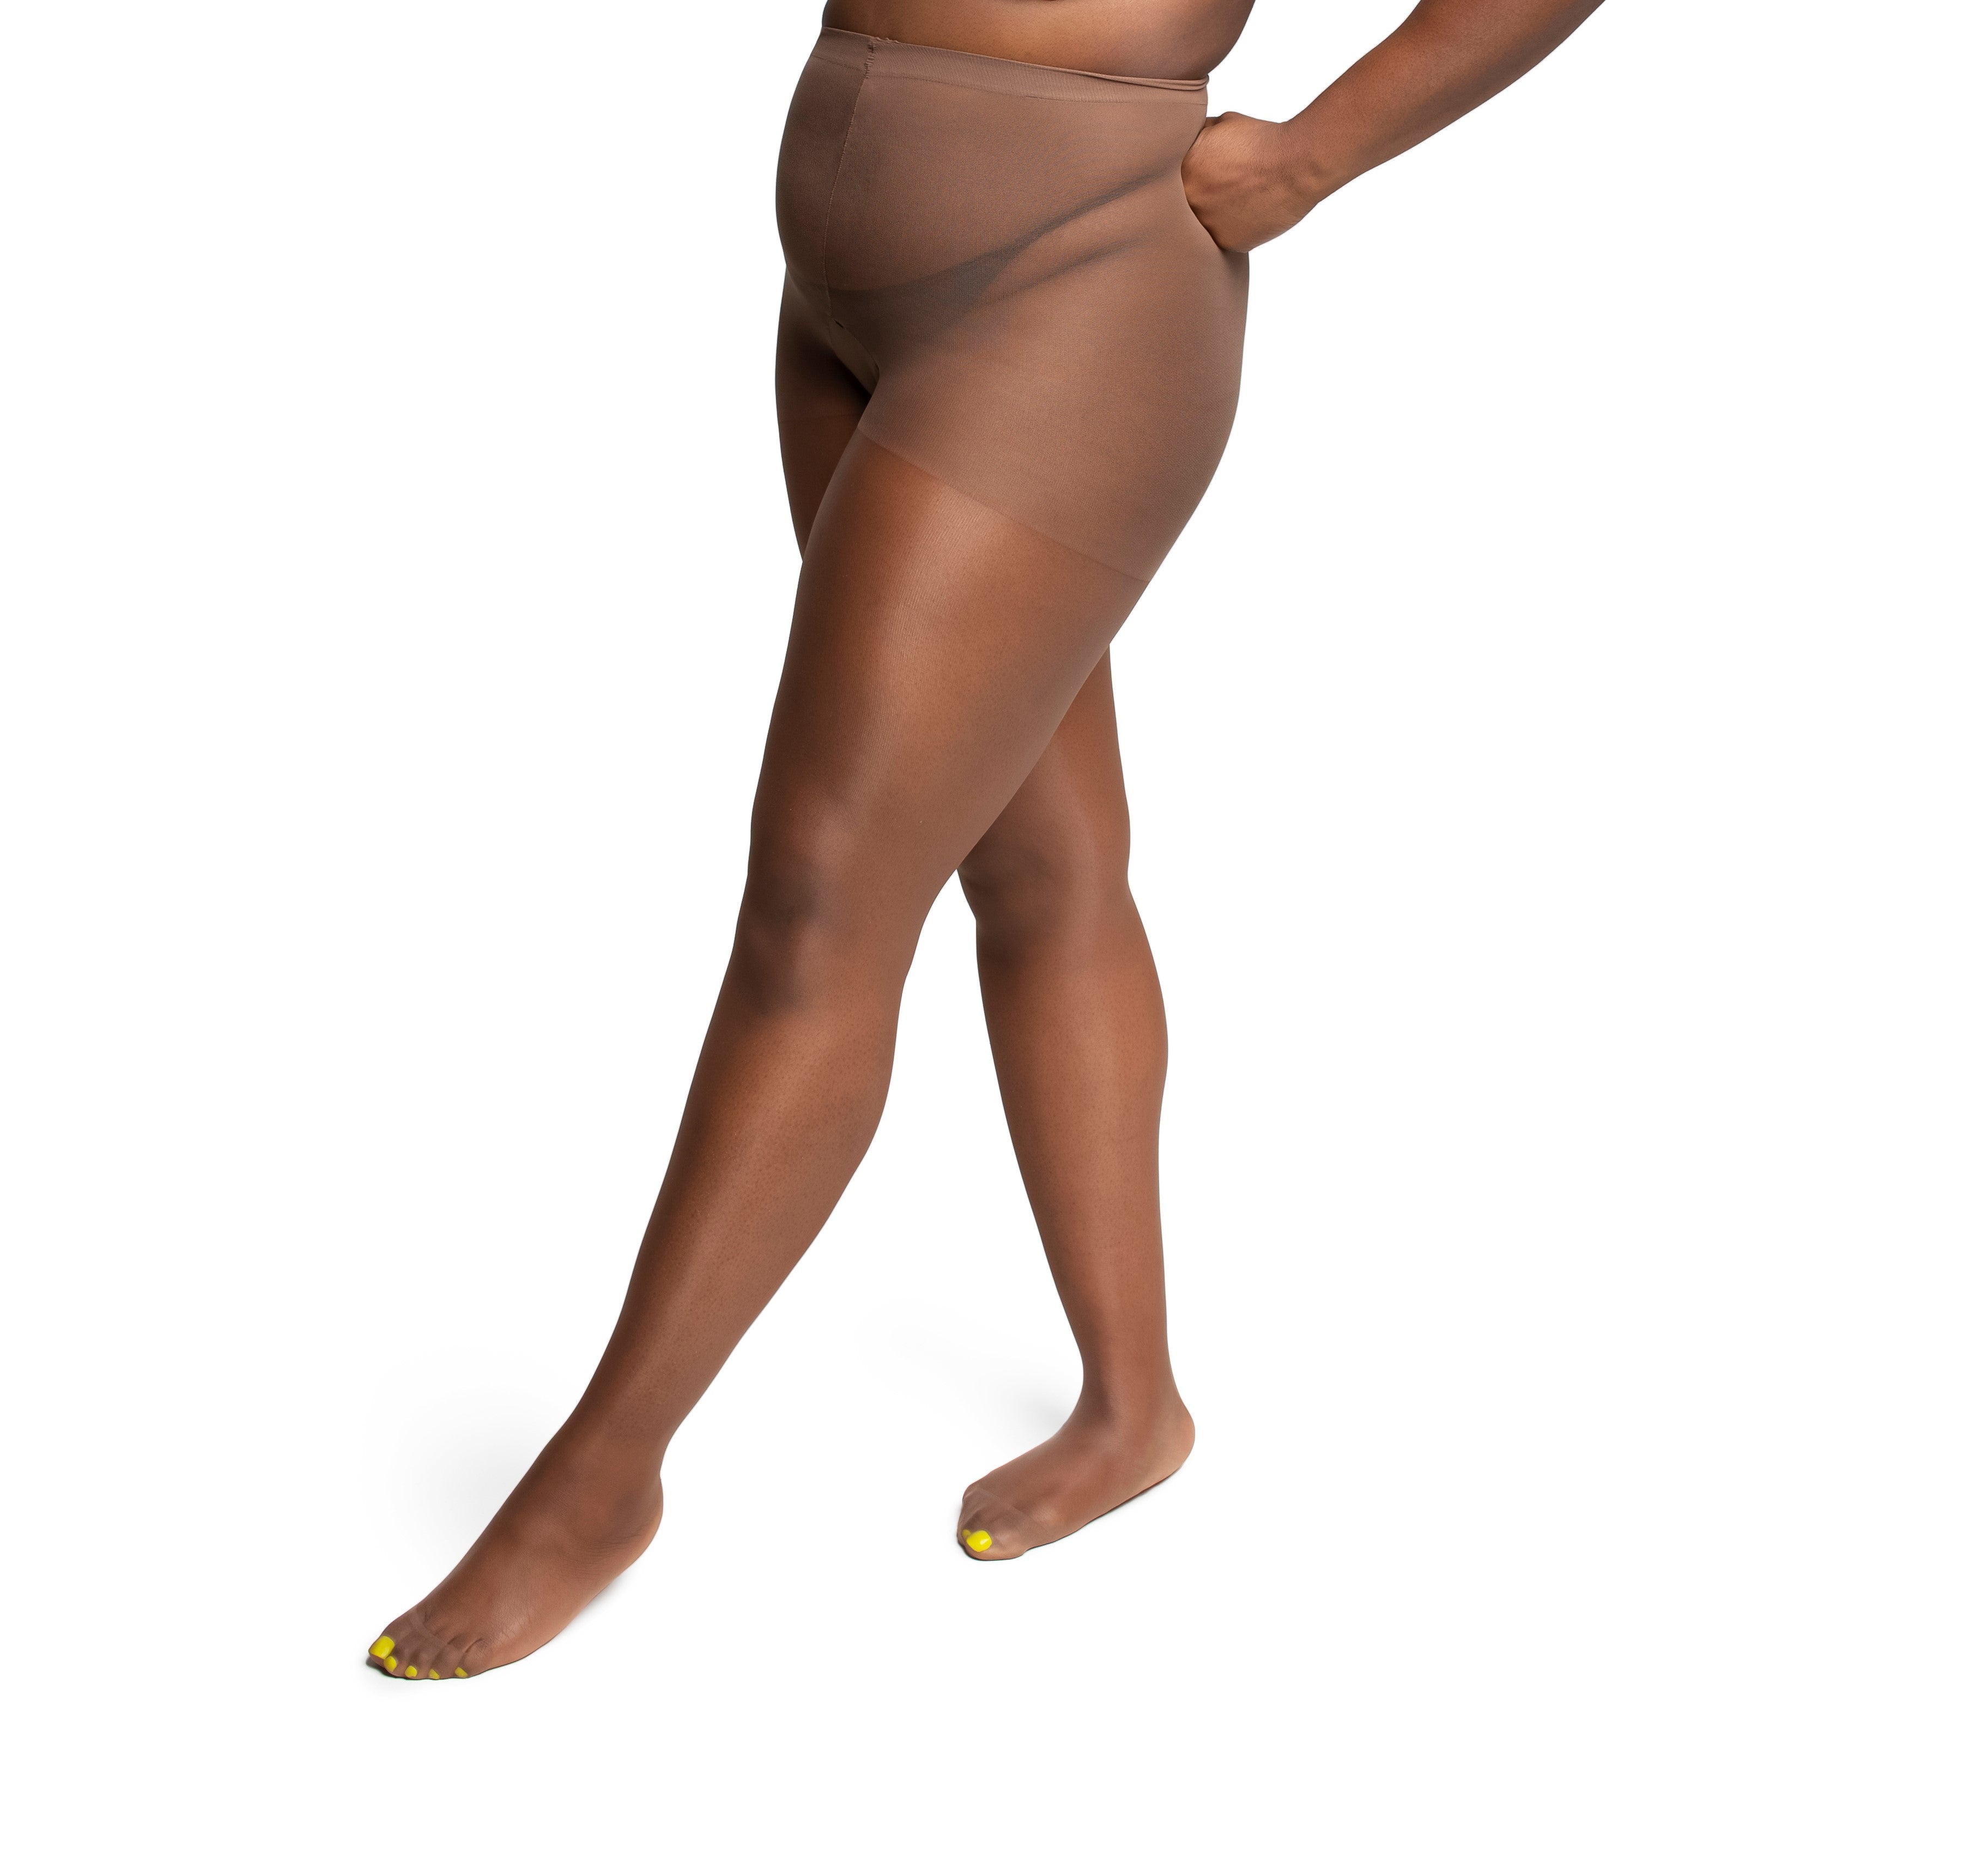 Brown Skin Essentials - The New Brand For Darker Tones - UK Tights